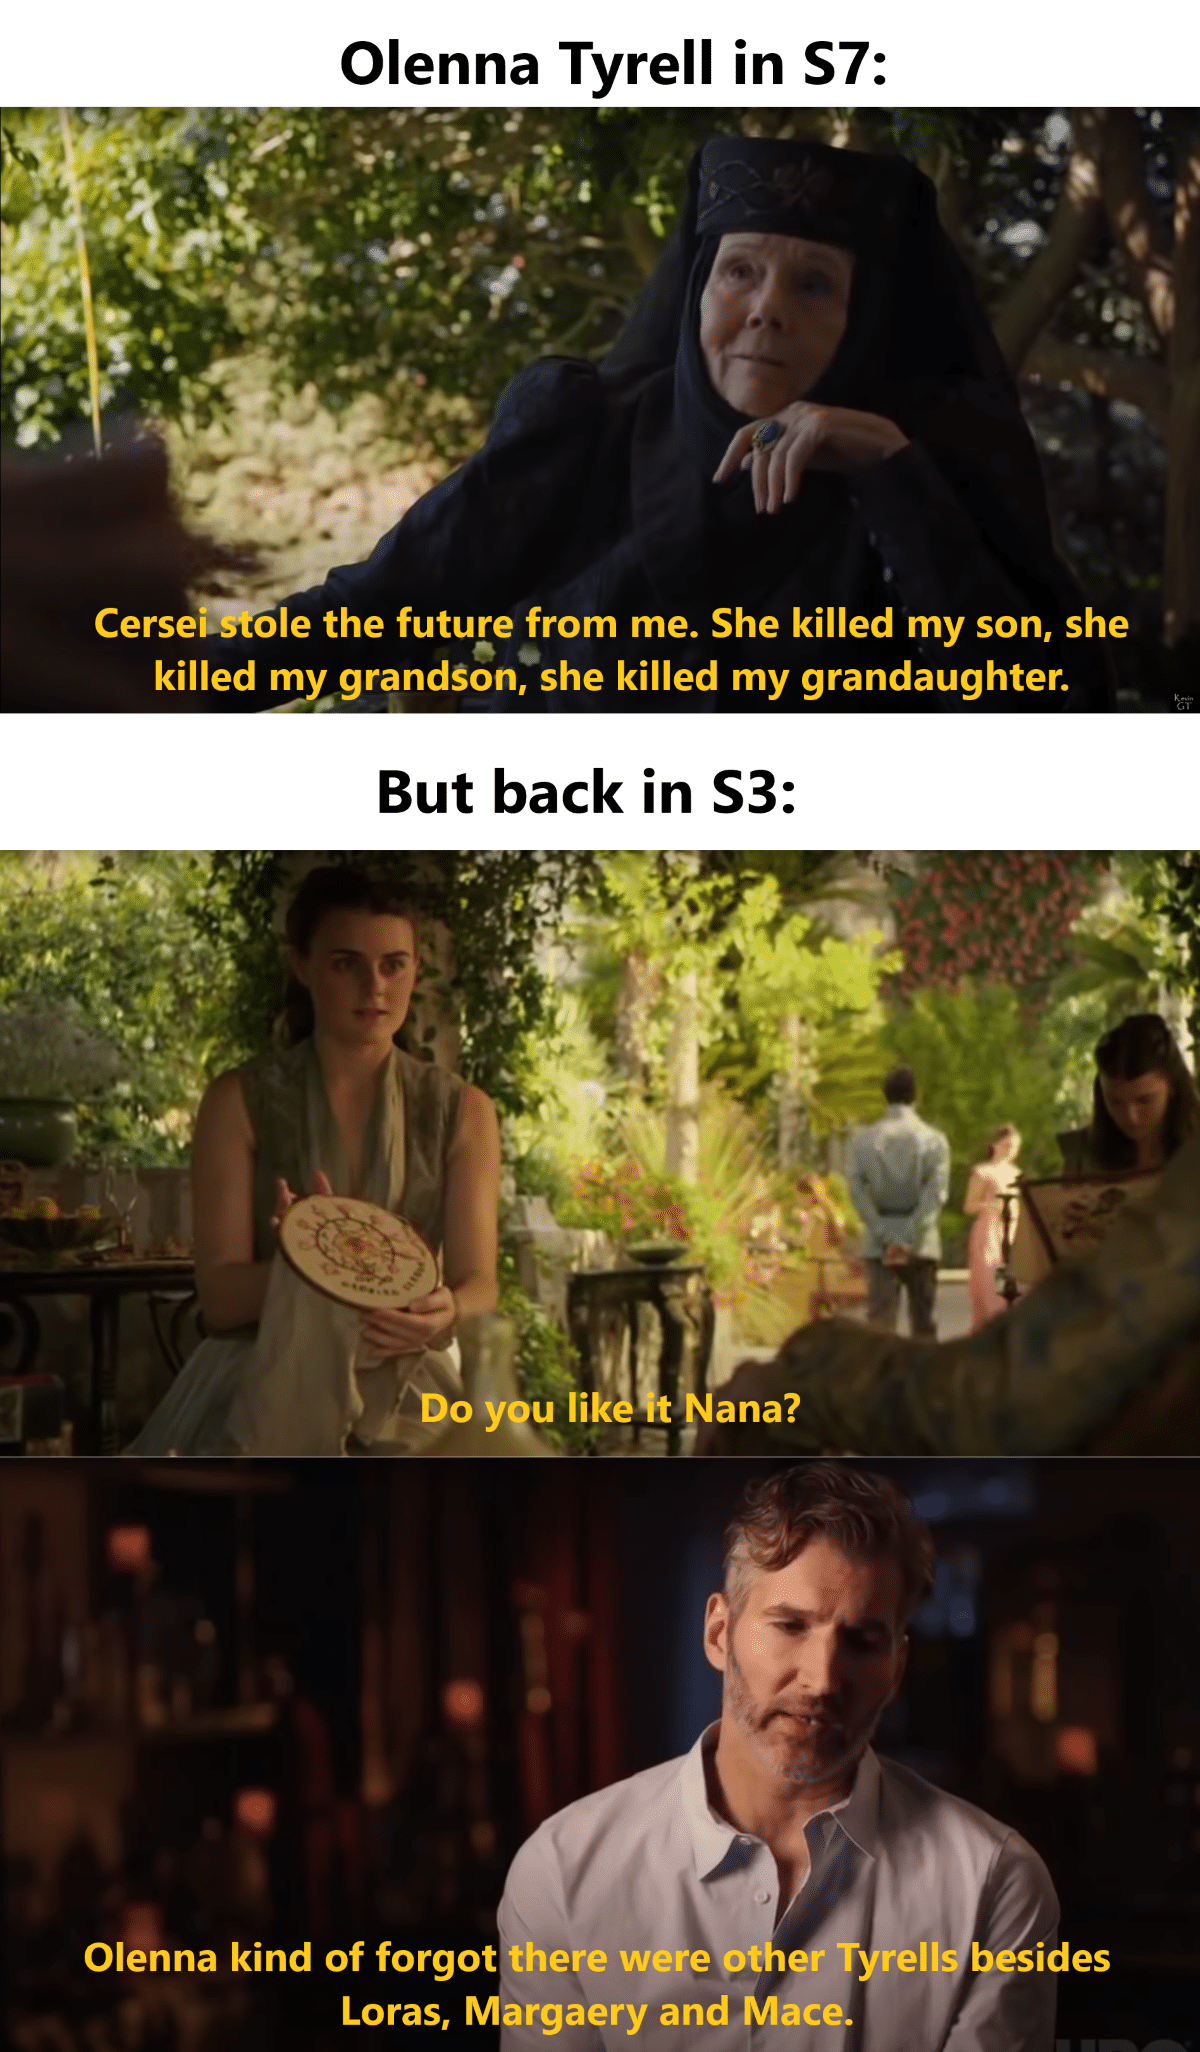 Tyrell, Olenna, Cersei, Tyrell, Loras, Highgarden Game of thrones memes Tyrell, Olenna, Cersei, Tyrell, Loras, Highgarden text: Olenna Tyrell in S7: Cersels ole the future from me. She killed my son, she killed my grandSon, she killed my grandaughter. But back in S3: ygu lik t ana? Olenna kind of forgot there were ot er Tyrell b sides Loras, Margaery and Mace 